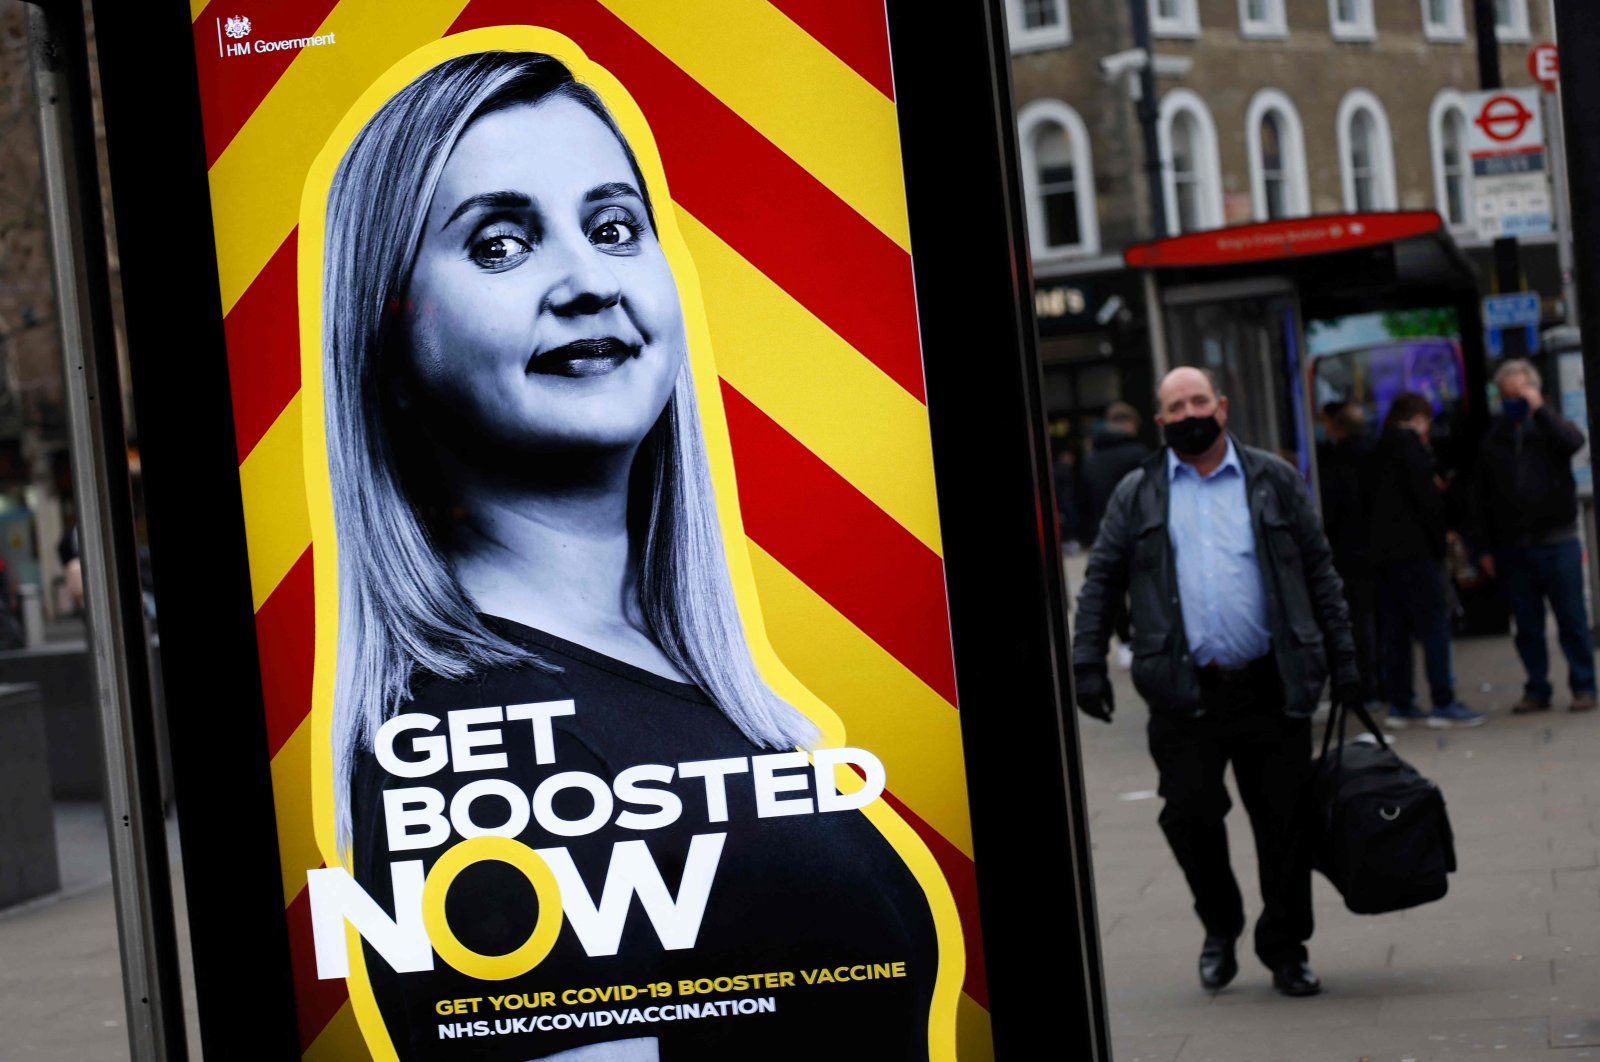 Pedestrians walk past a government advertisement promoting the NHS&#039; COVID-19 vaccine booster program at a bus stop in London, U.K., Dec. 17, 2021. (AFP Photo)